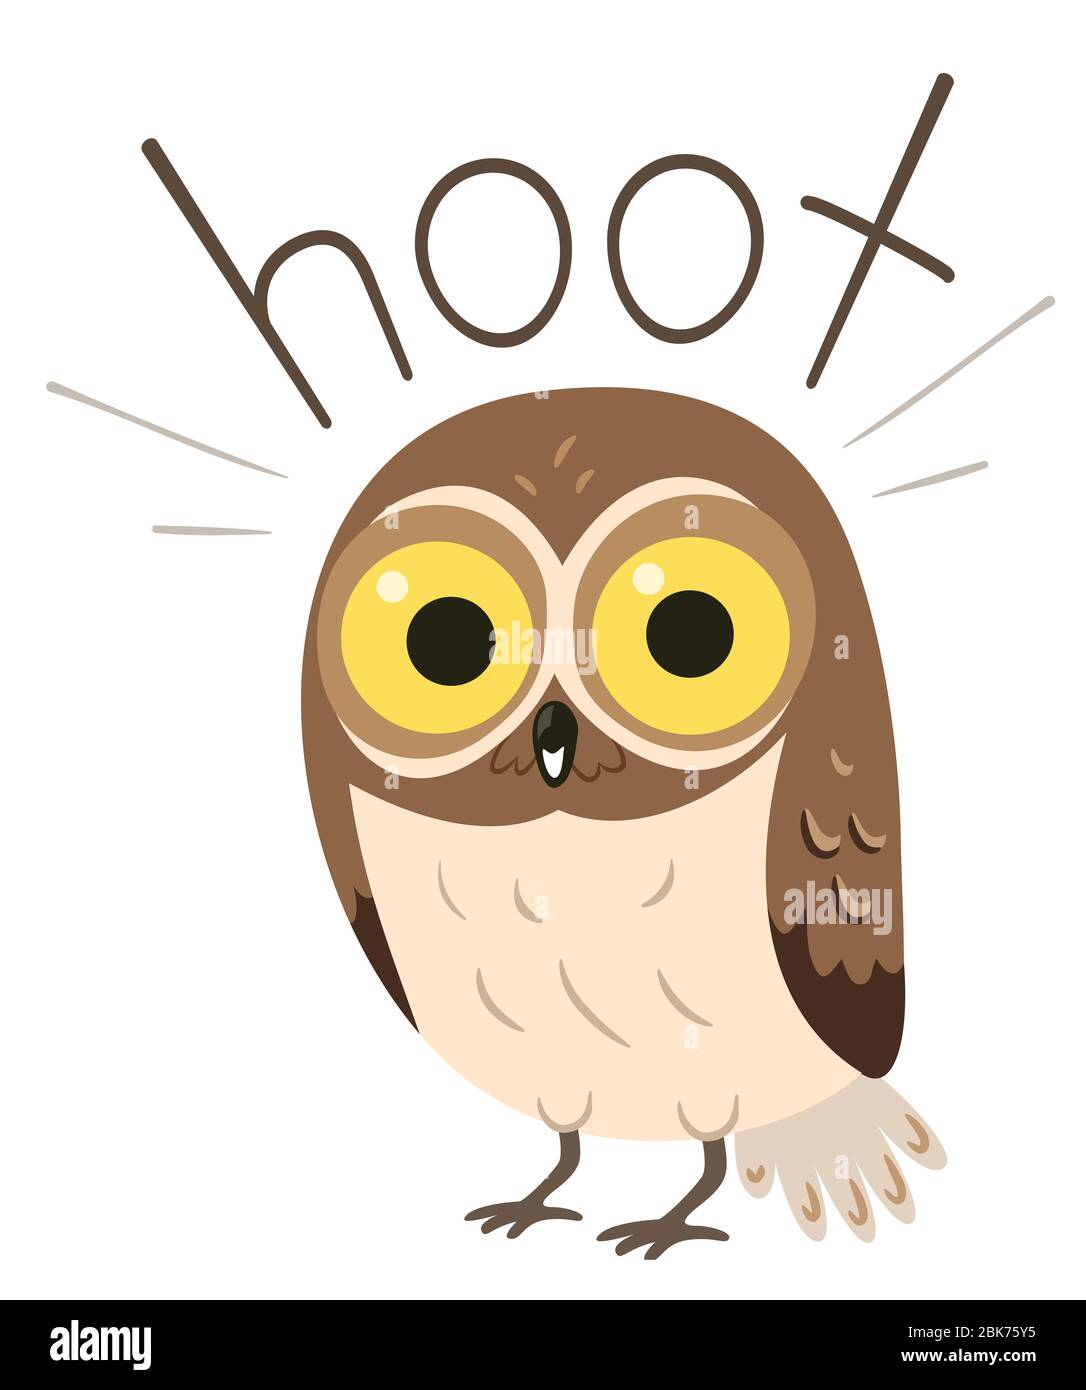 Illustration of an Owl Making a Hooting Sound Stock Photo